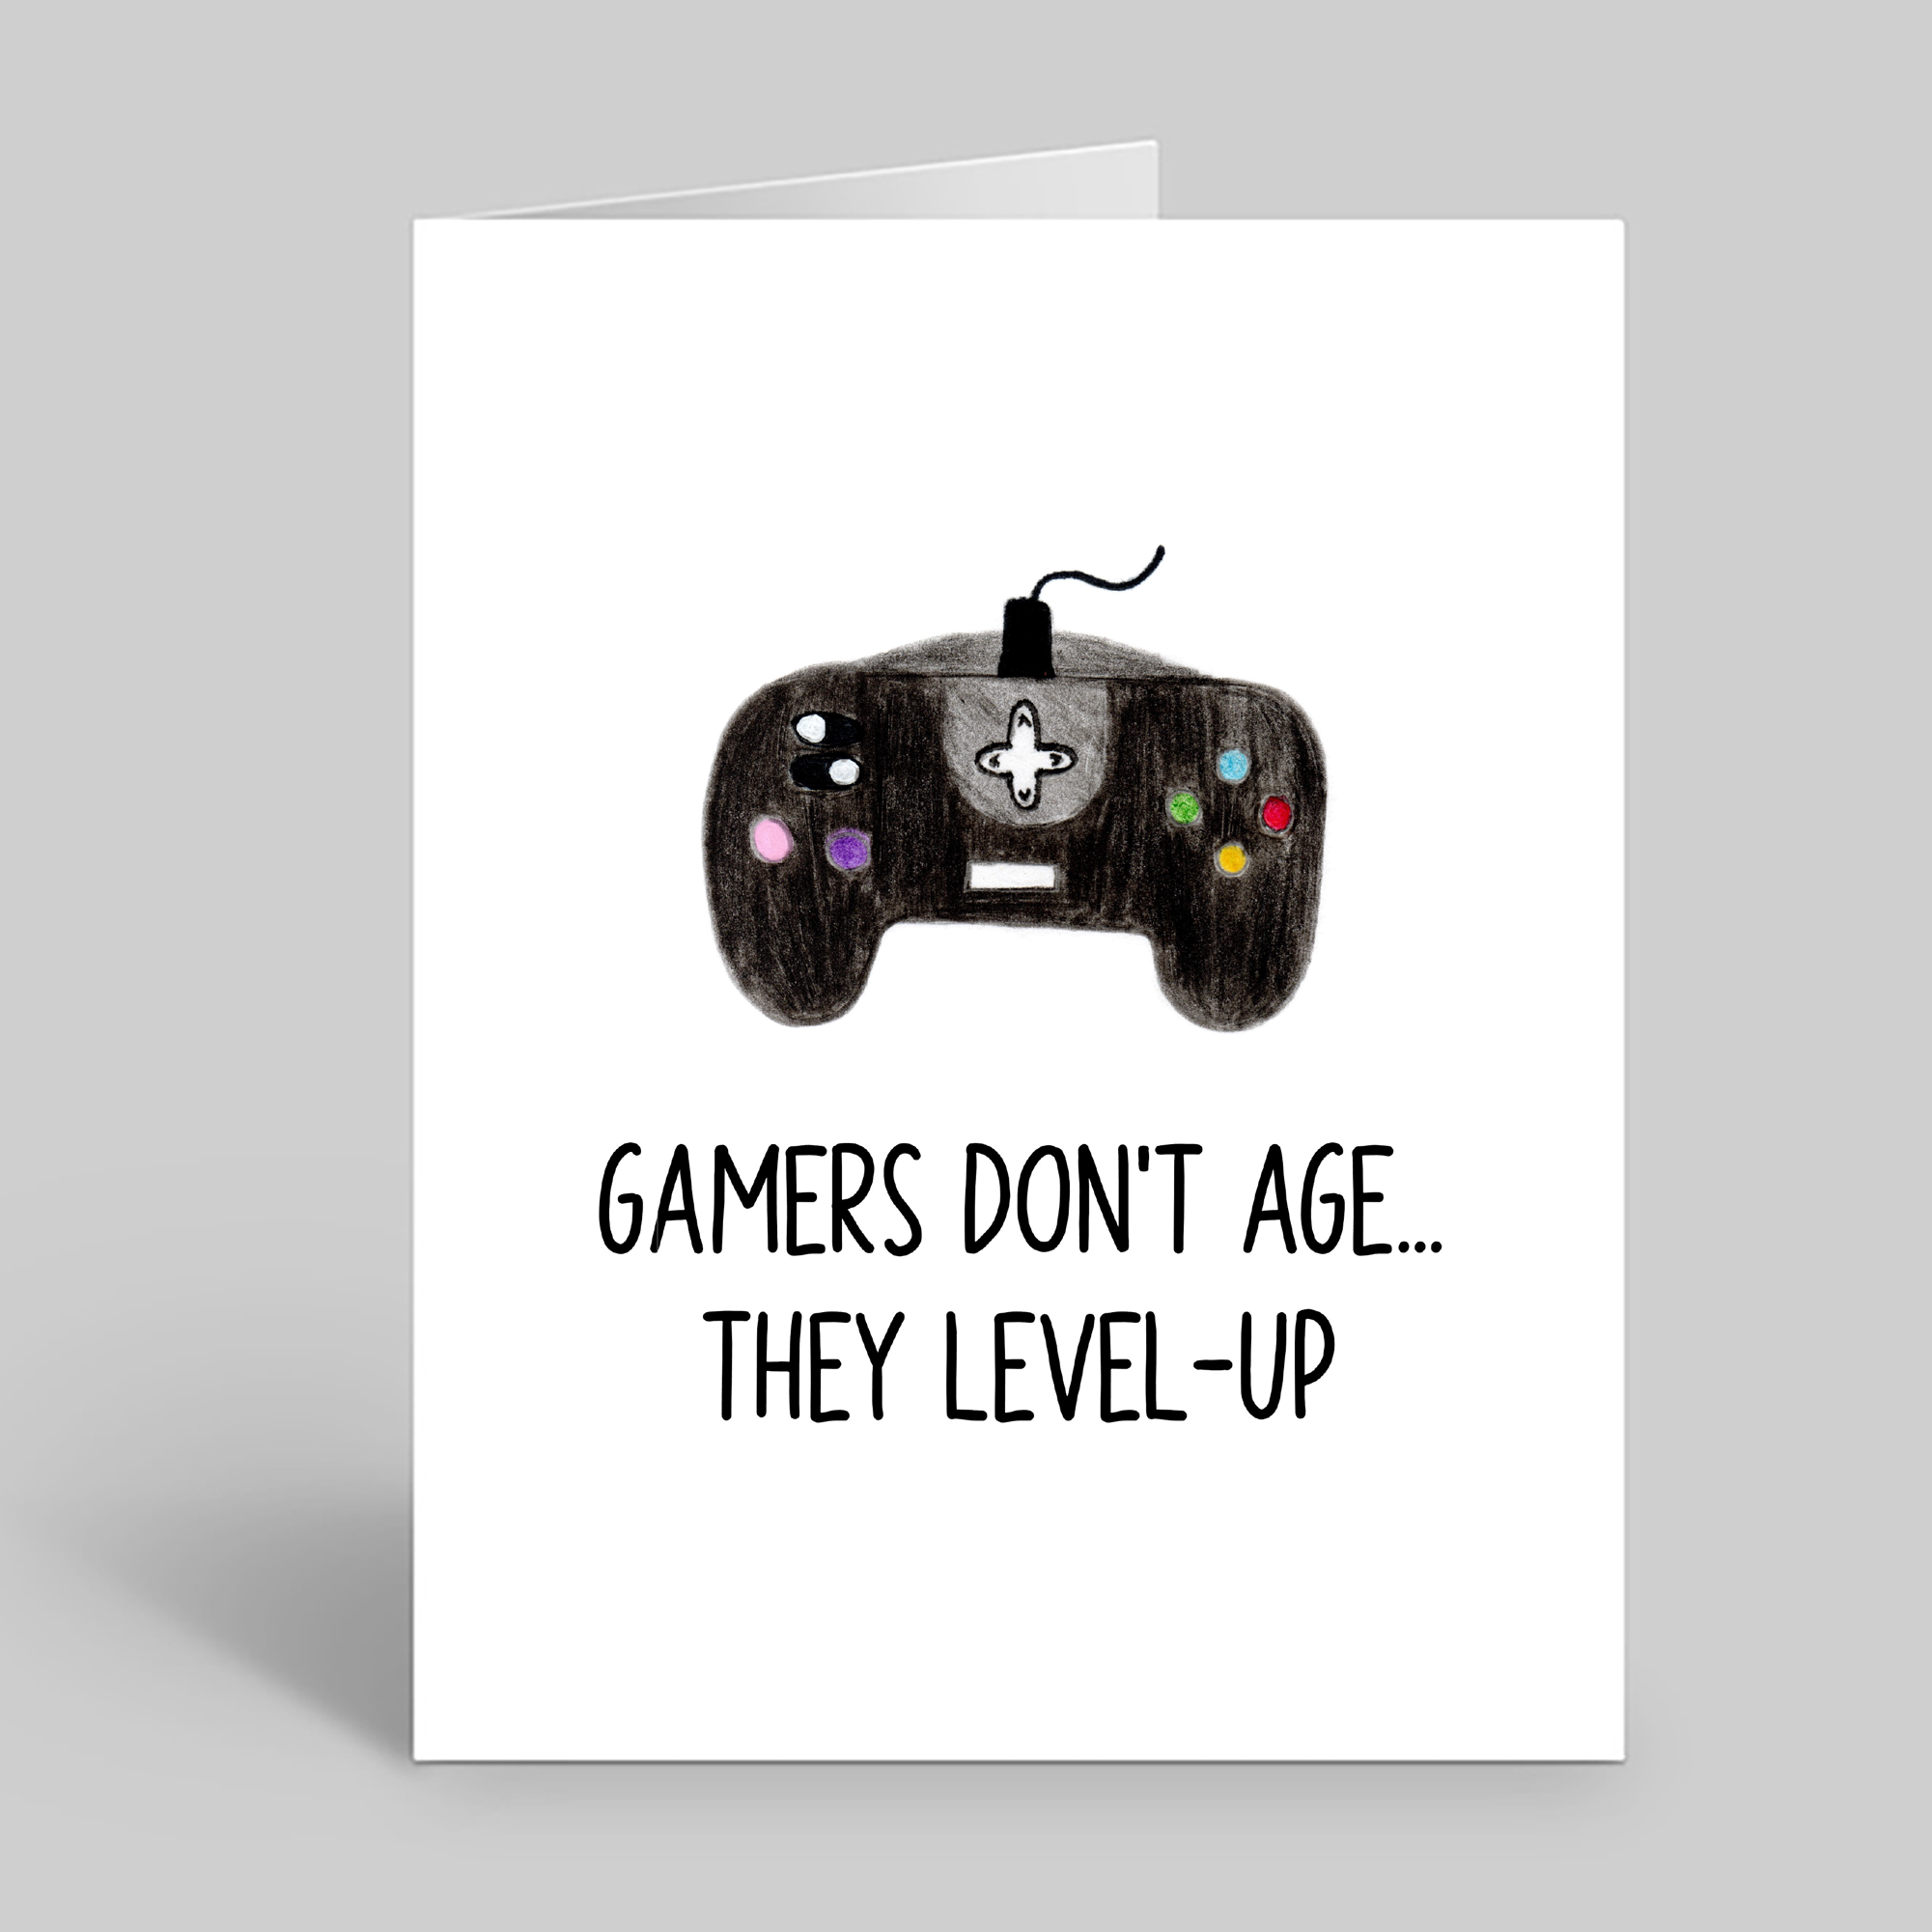 Gamers don't age, they level up – Count Your Smiles